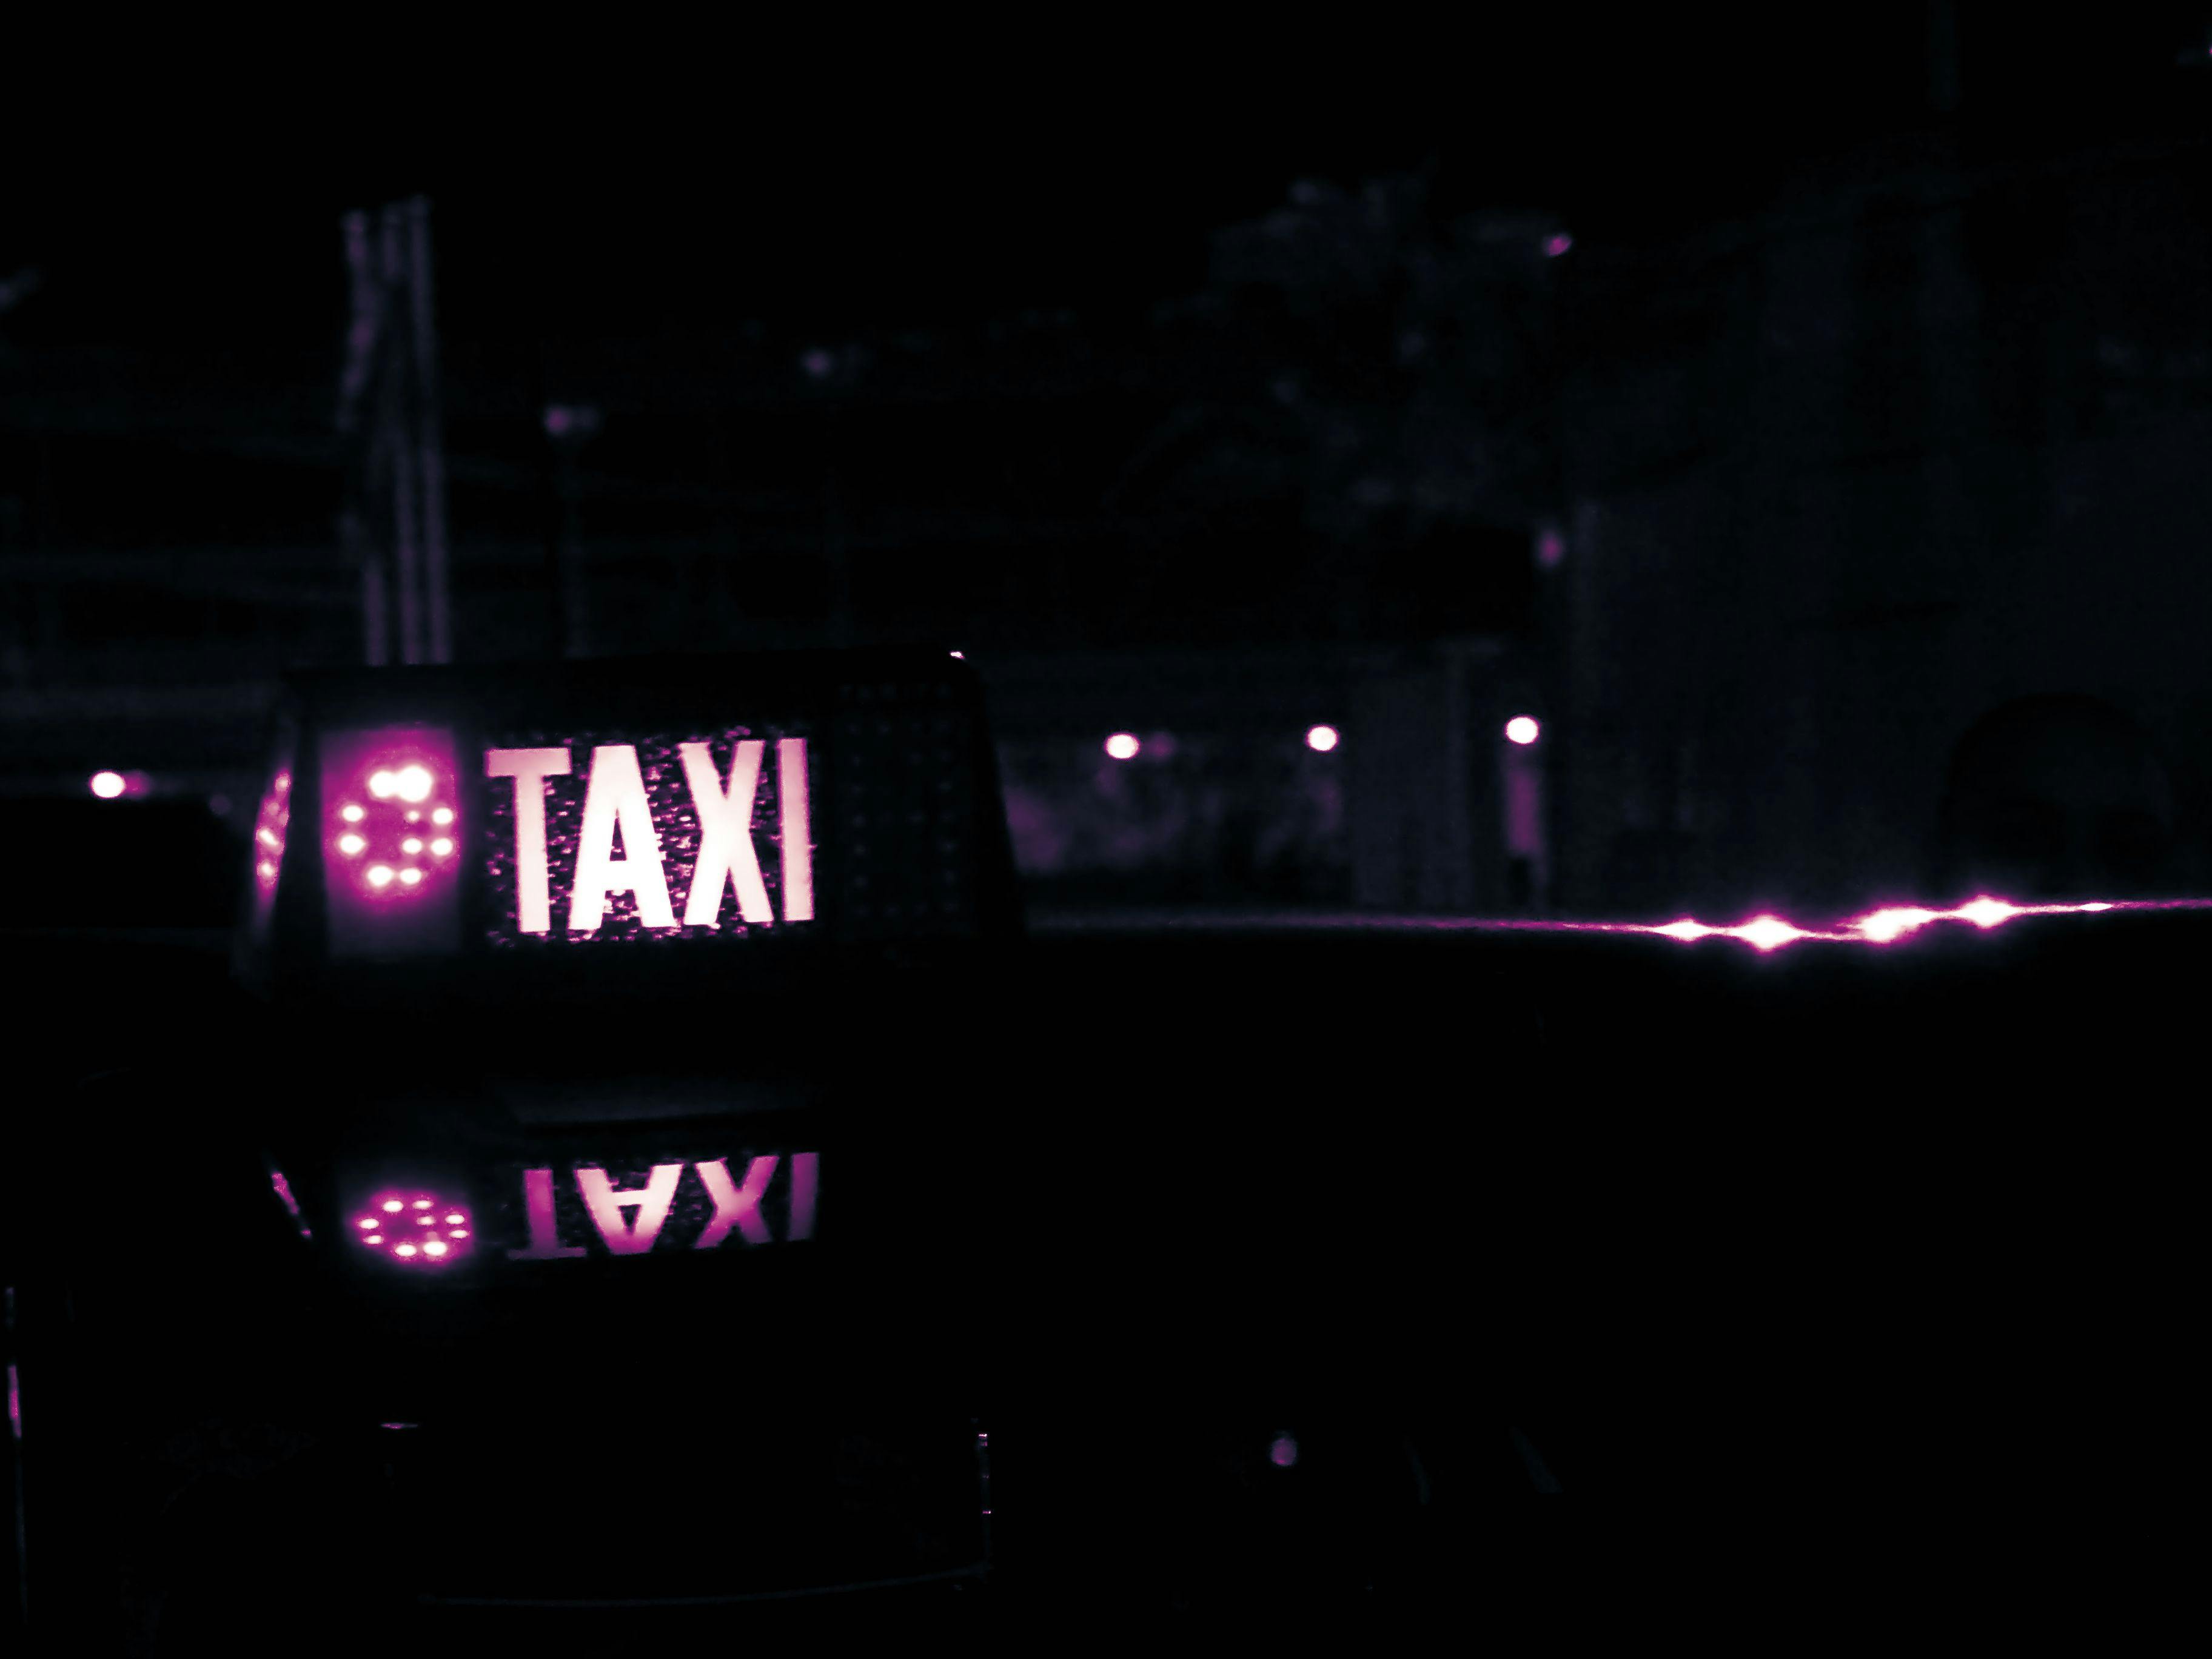 Lighted Taxi Sign at Night \u00b7 Free Stock Photo